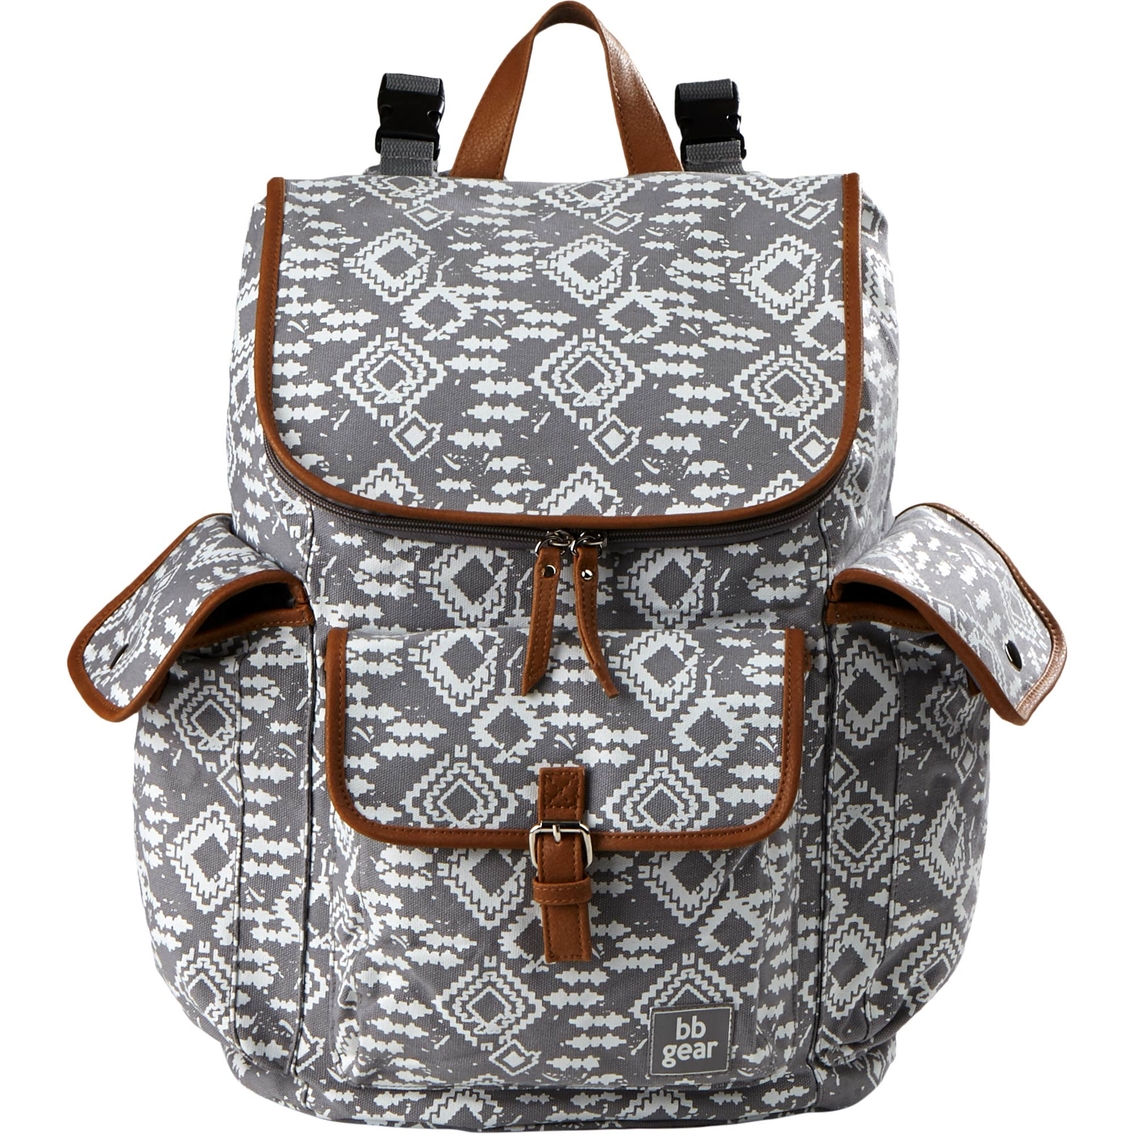 Baby Boom Gear Gray Aztec Print Backpack Diaper Bag | Diaper Bags | Baby & Toys | Shop The Exchange